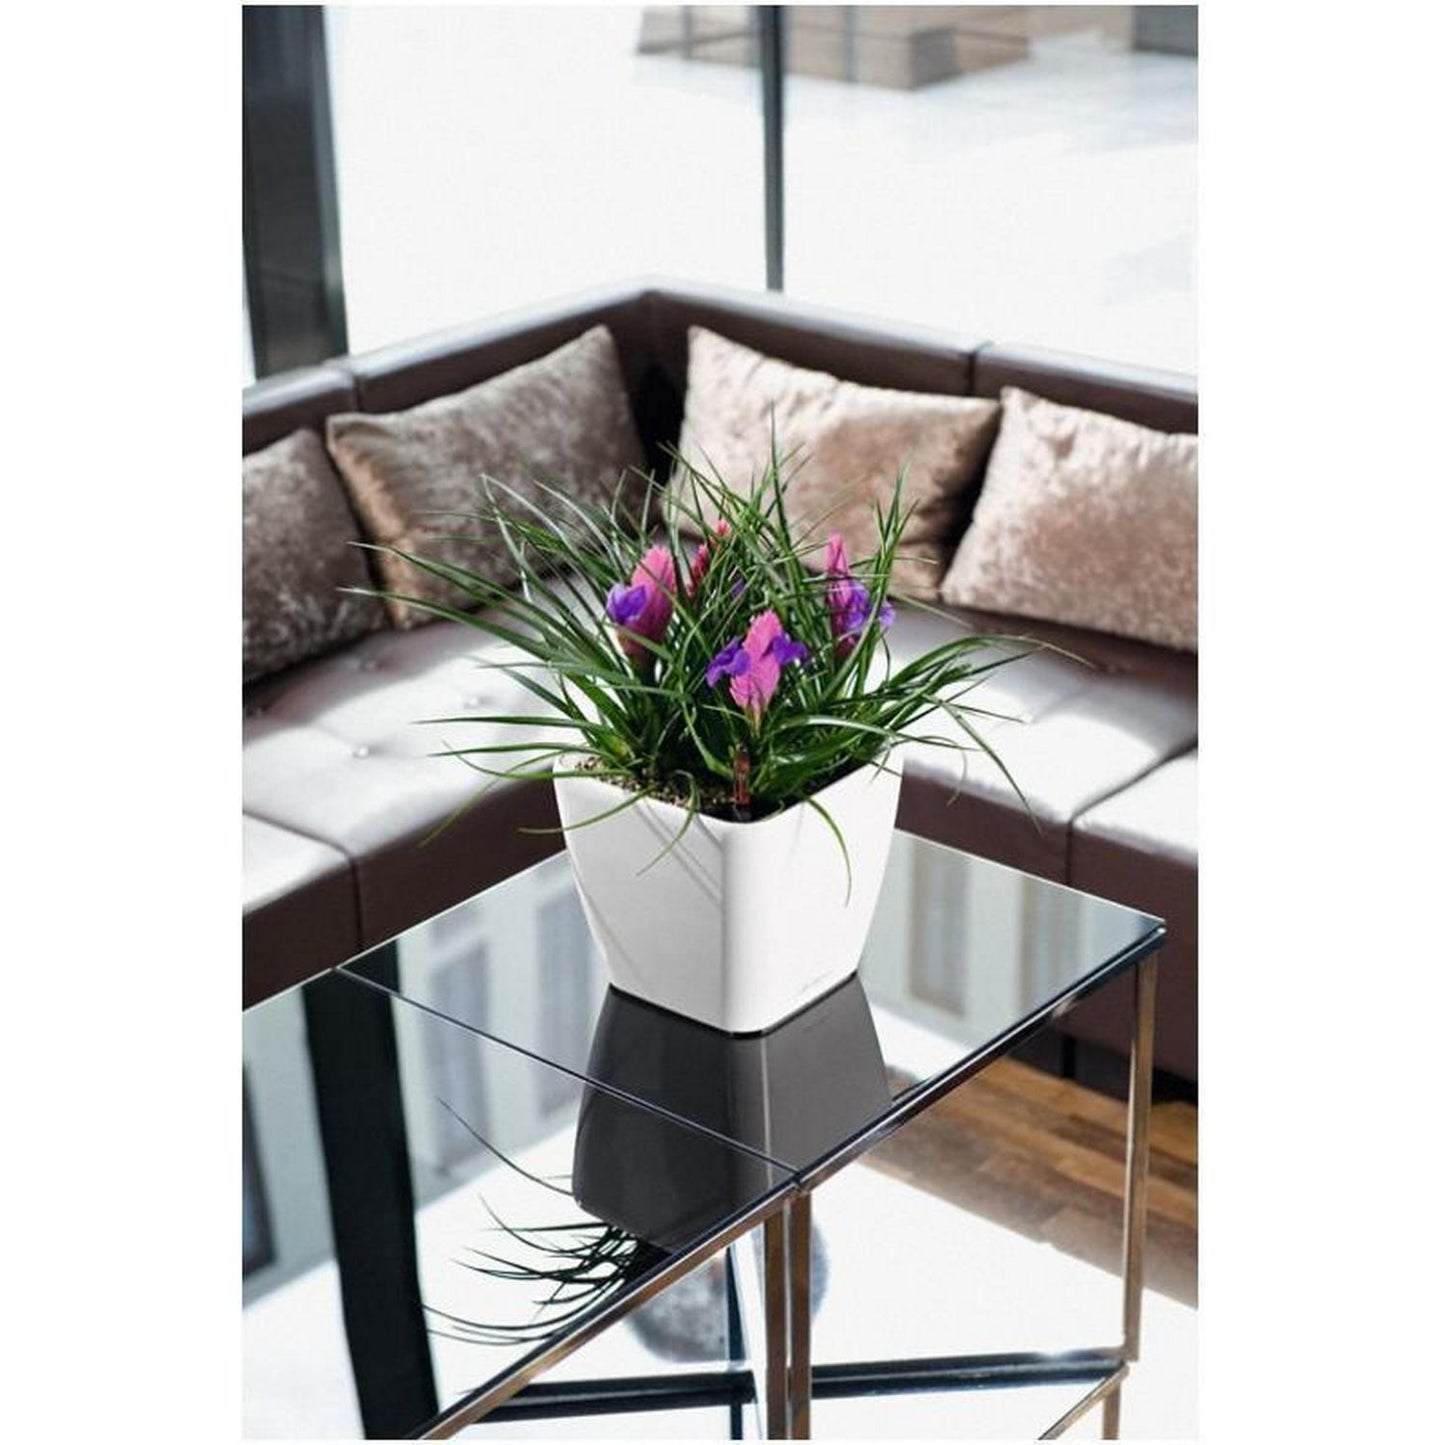 Set of two LECHUZA CUBICO Color Slate Self Watering Planters Indoor/Outdoor Flower Pots: L22 W22 H41 cm, 6 litres Cap + L30 W30 H56 cm, 14 litres Cap - citiplants.com